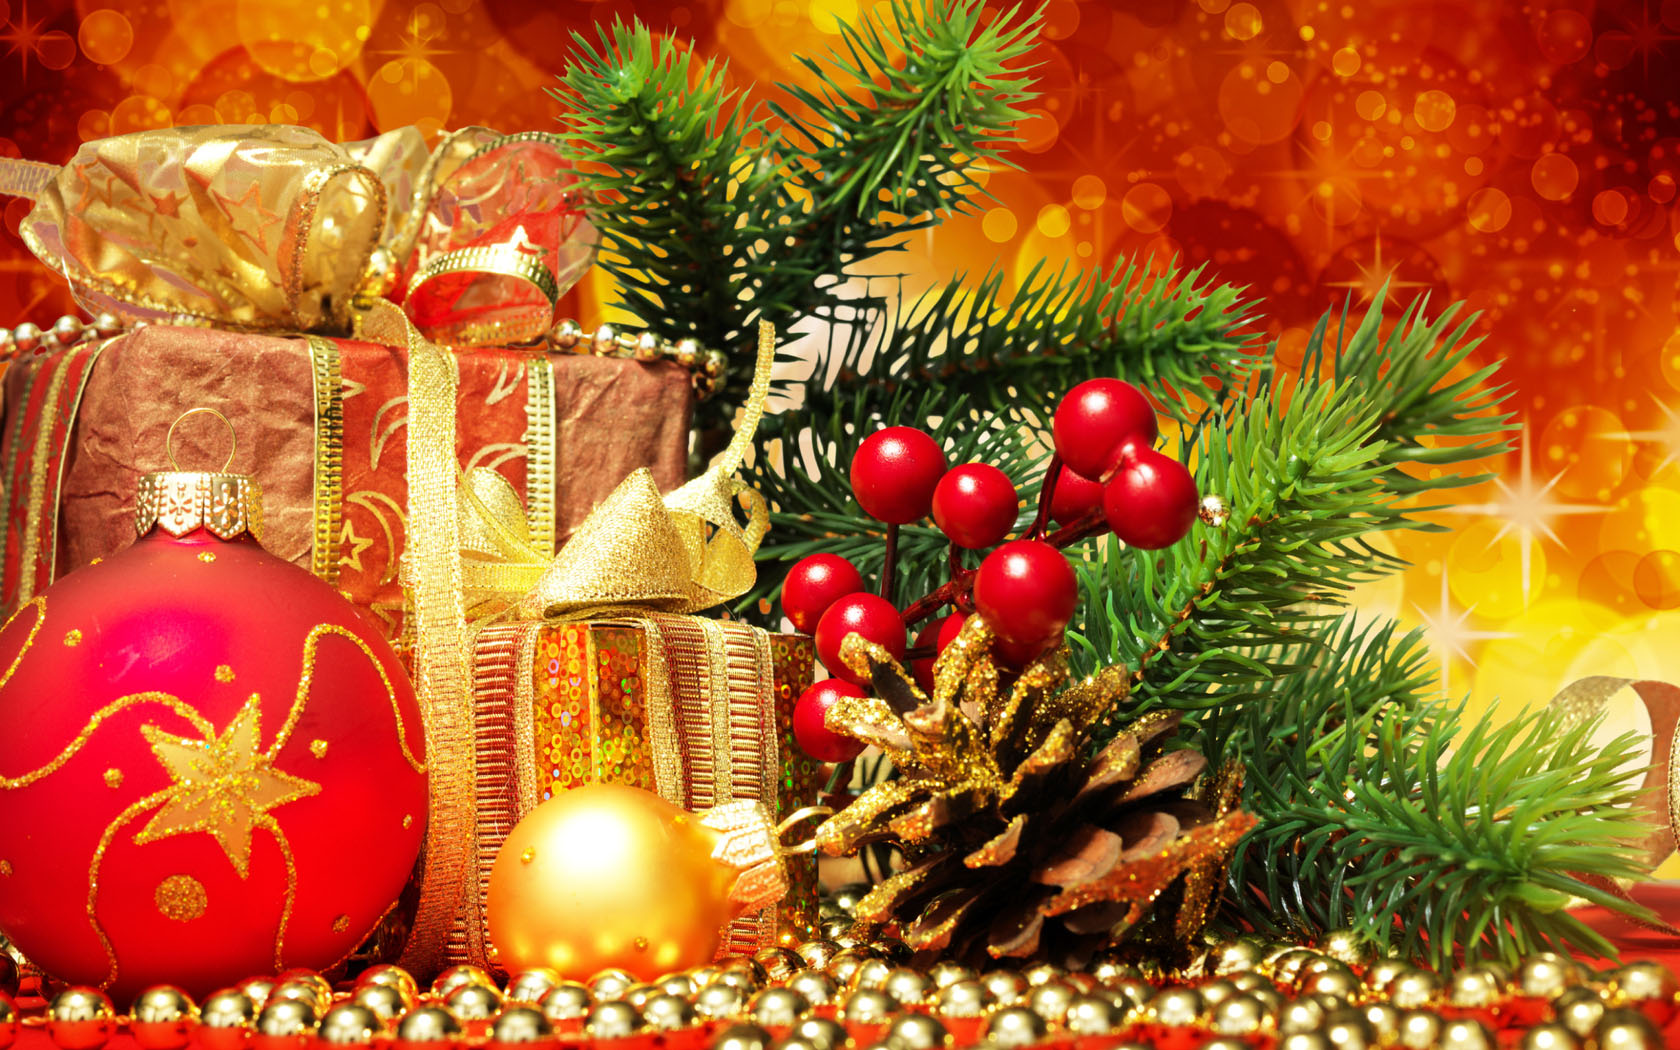 Exquisite Christmas wallpaper picture